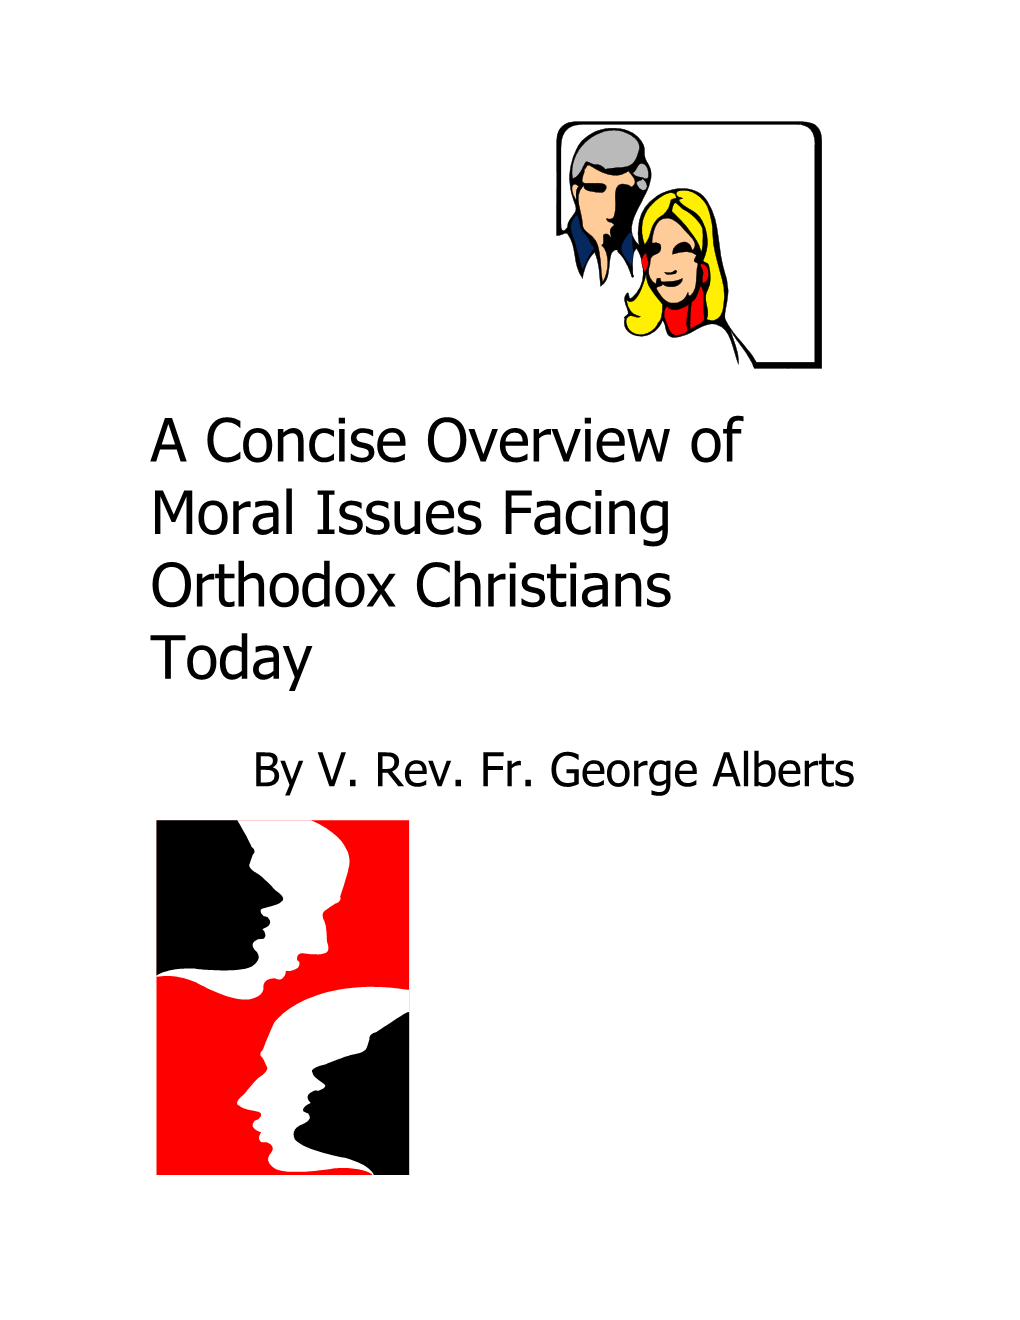 A Concise Overview of Moral Issues Facing Orthodox Christians Today